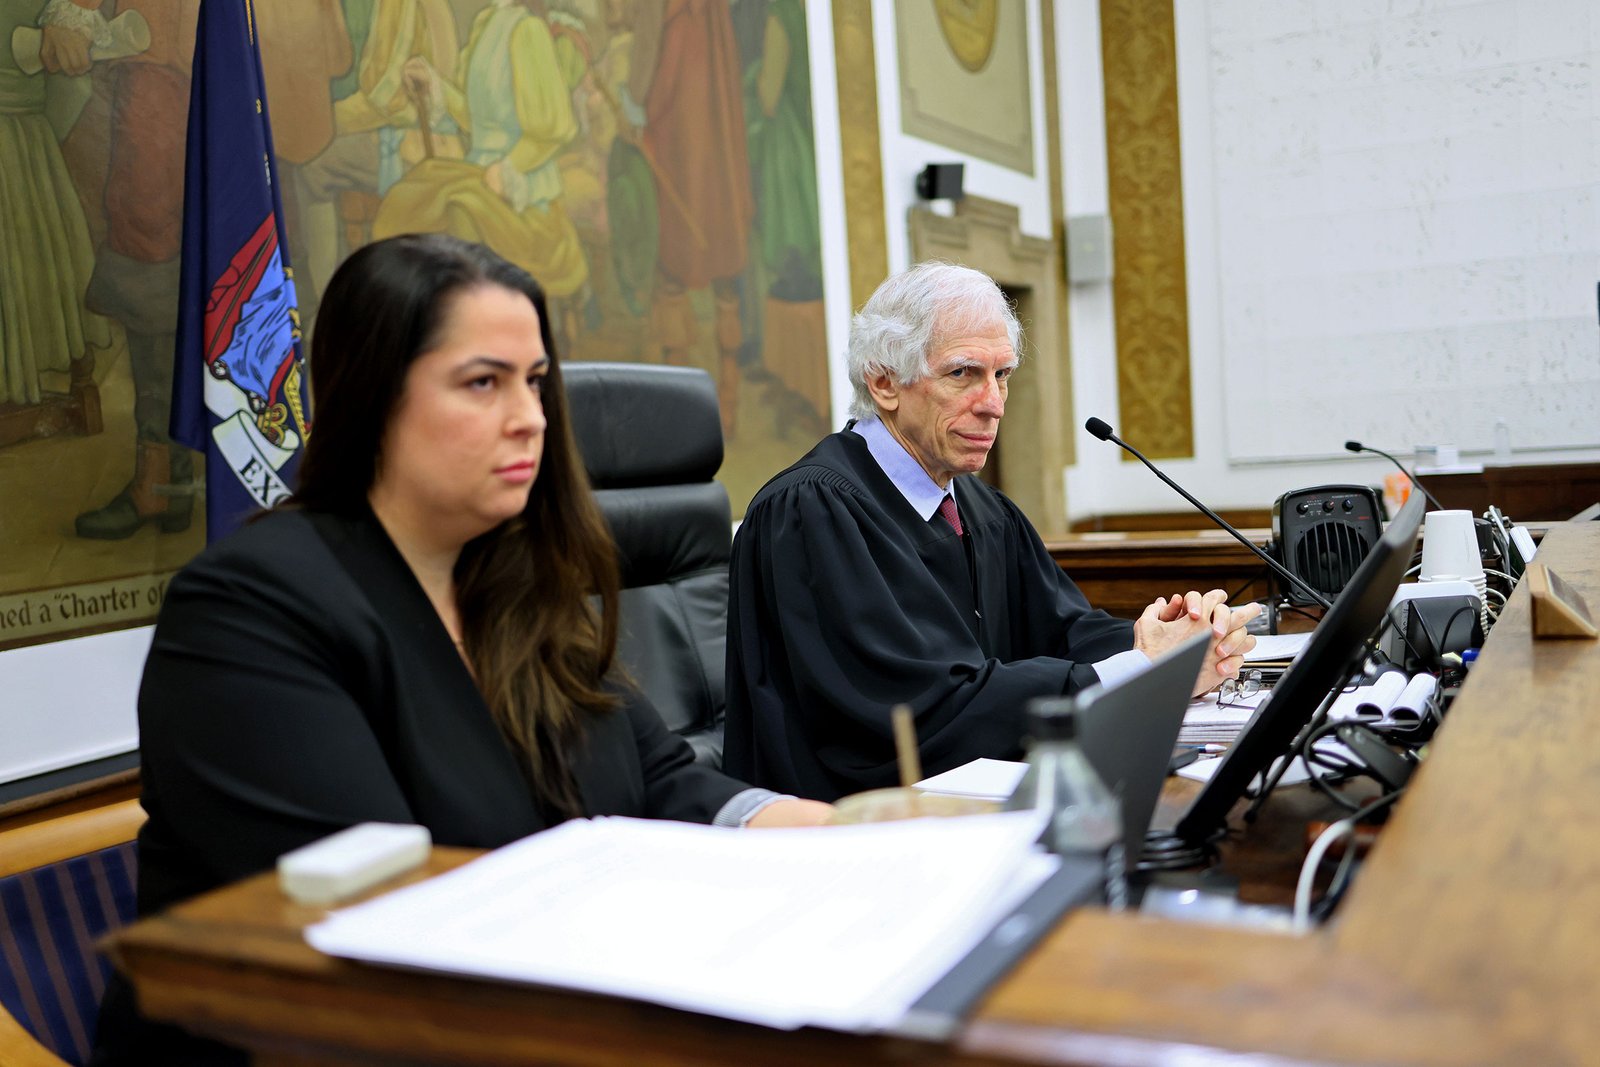 Justice Arthur Engoron presides over the civil fraud trial of former President Donald Trump and his children at New York Supreme Court on November 13. 